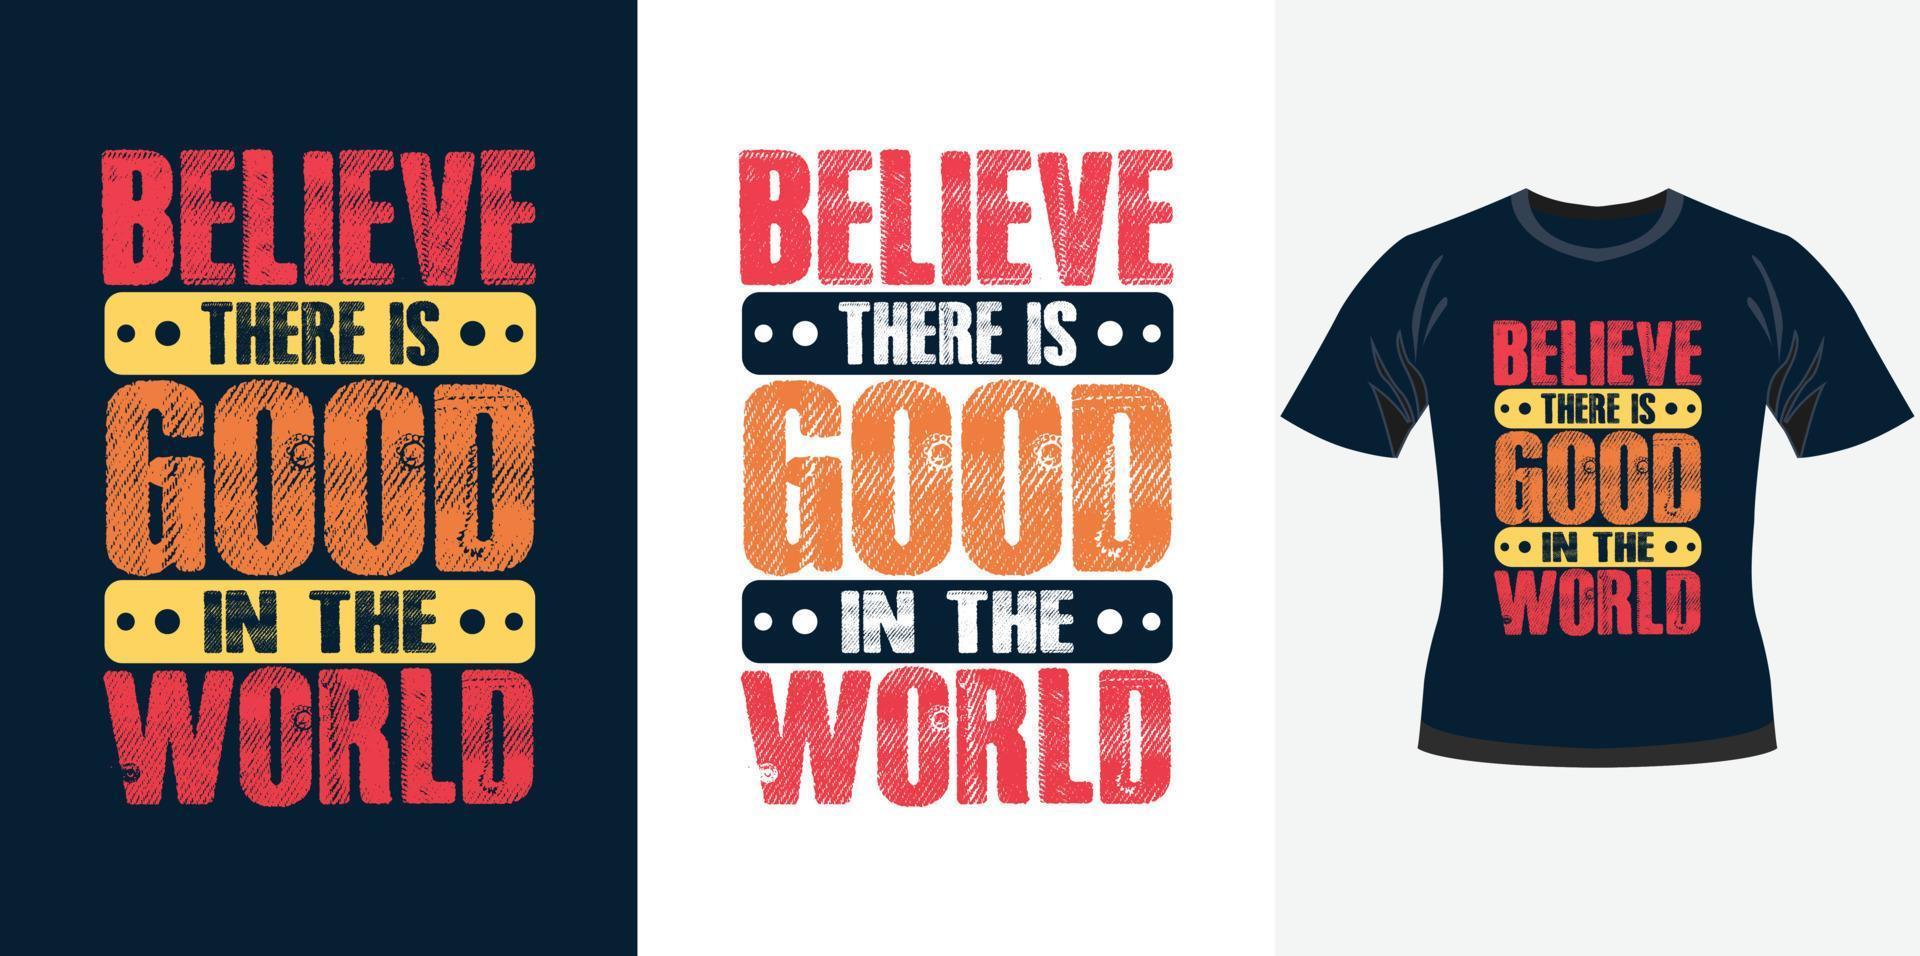 Believe there is good in the world trendy motivational typography design quote t-shirt design for t-shirt print vector